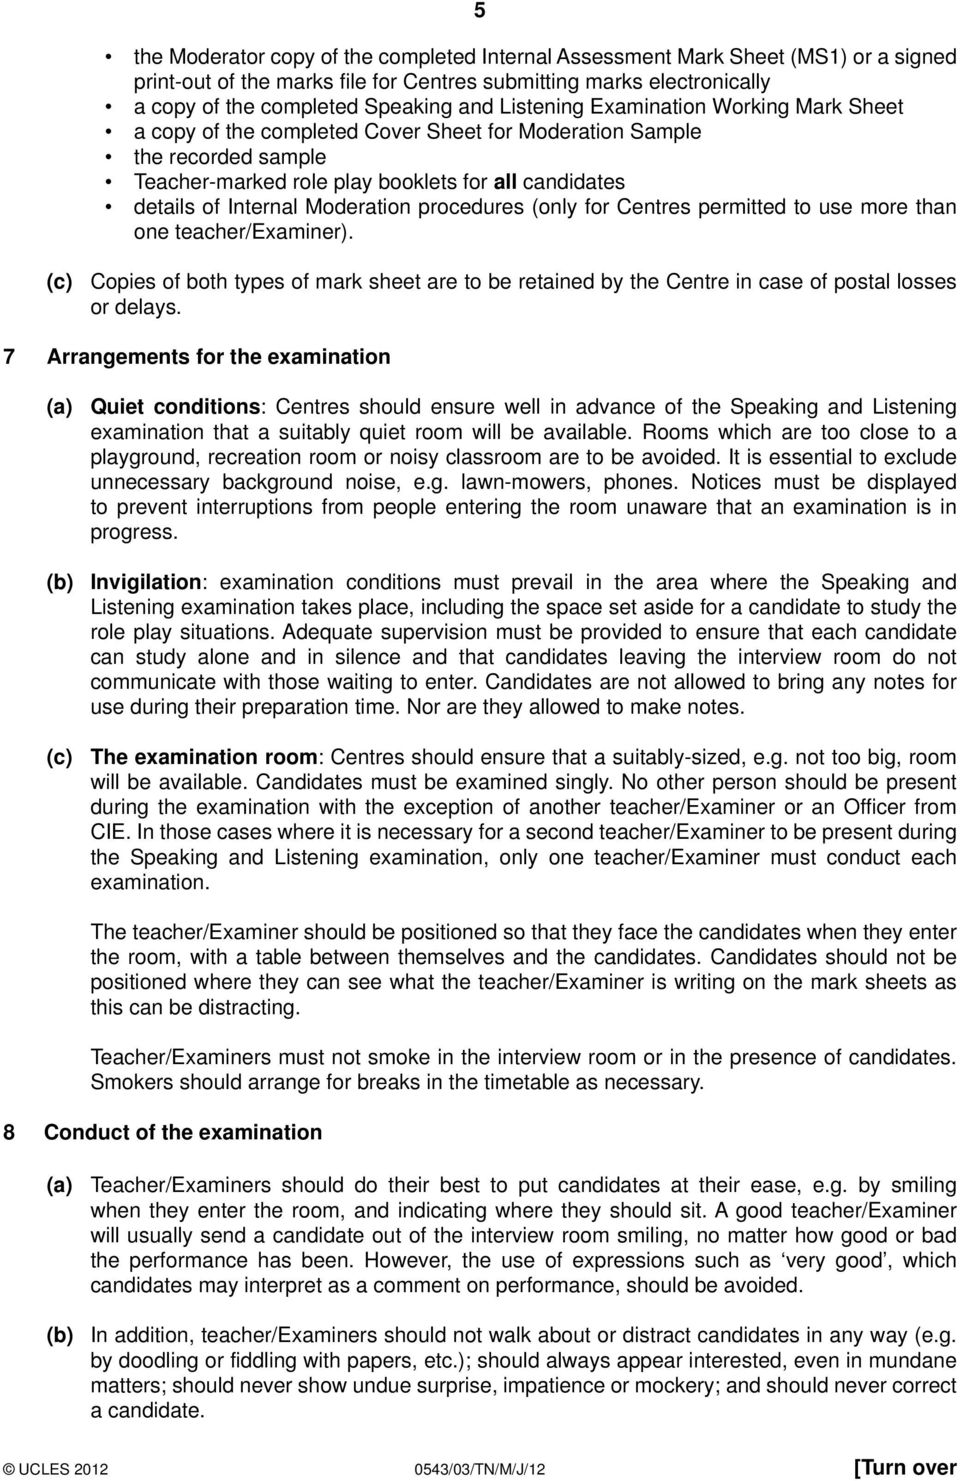 Moderation procedures (only for Centres permitted to use more than one teacher/examiner). (c) Copies of both types of mark sheet are to be retained by the Centre in case of postal losses or delays.